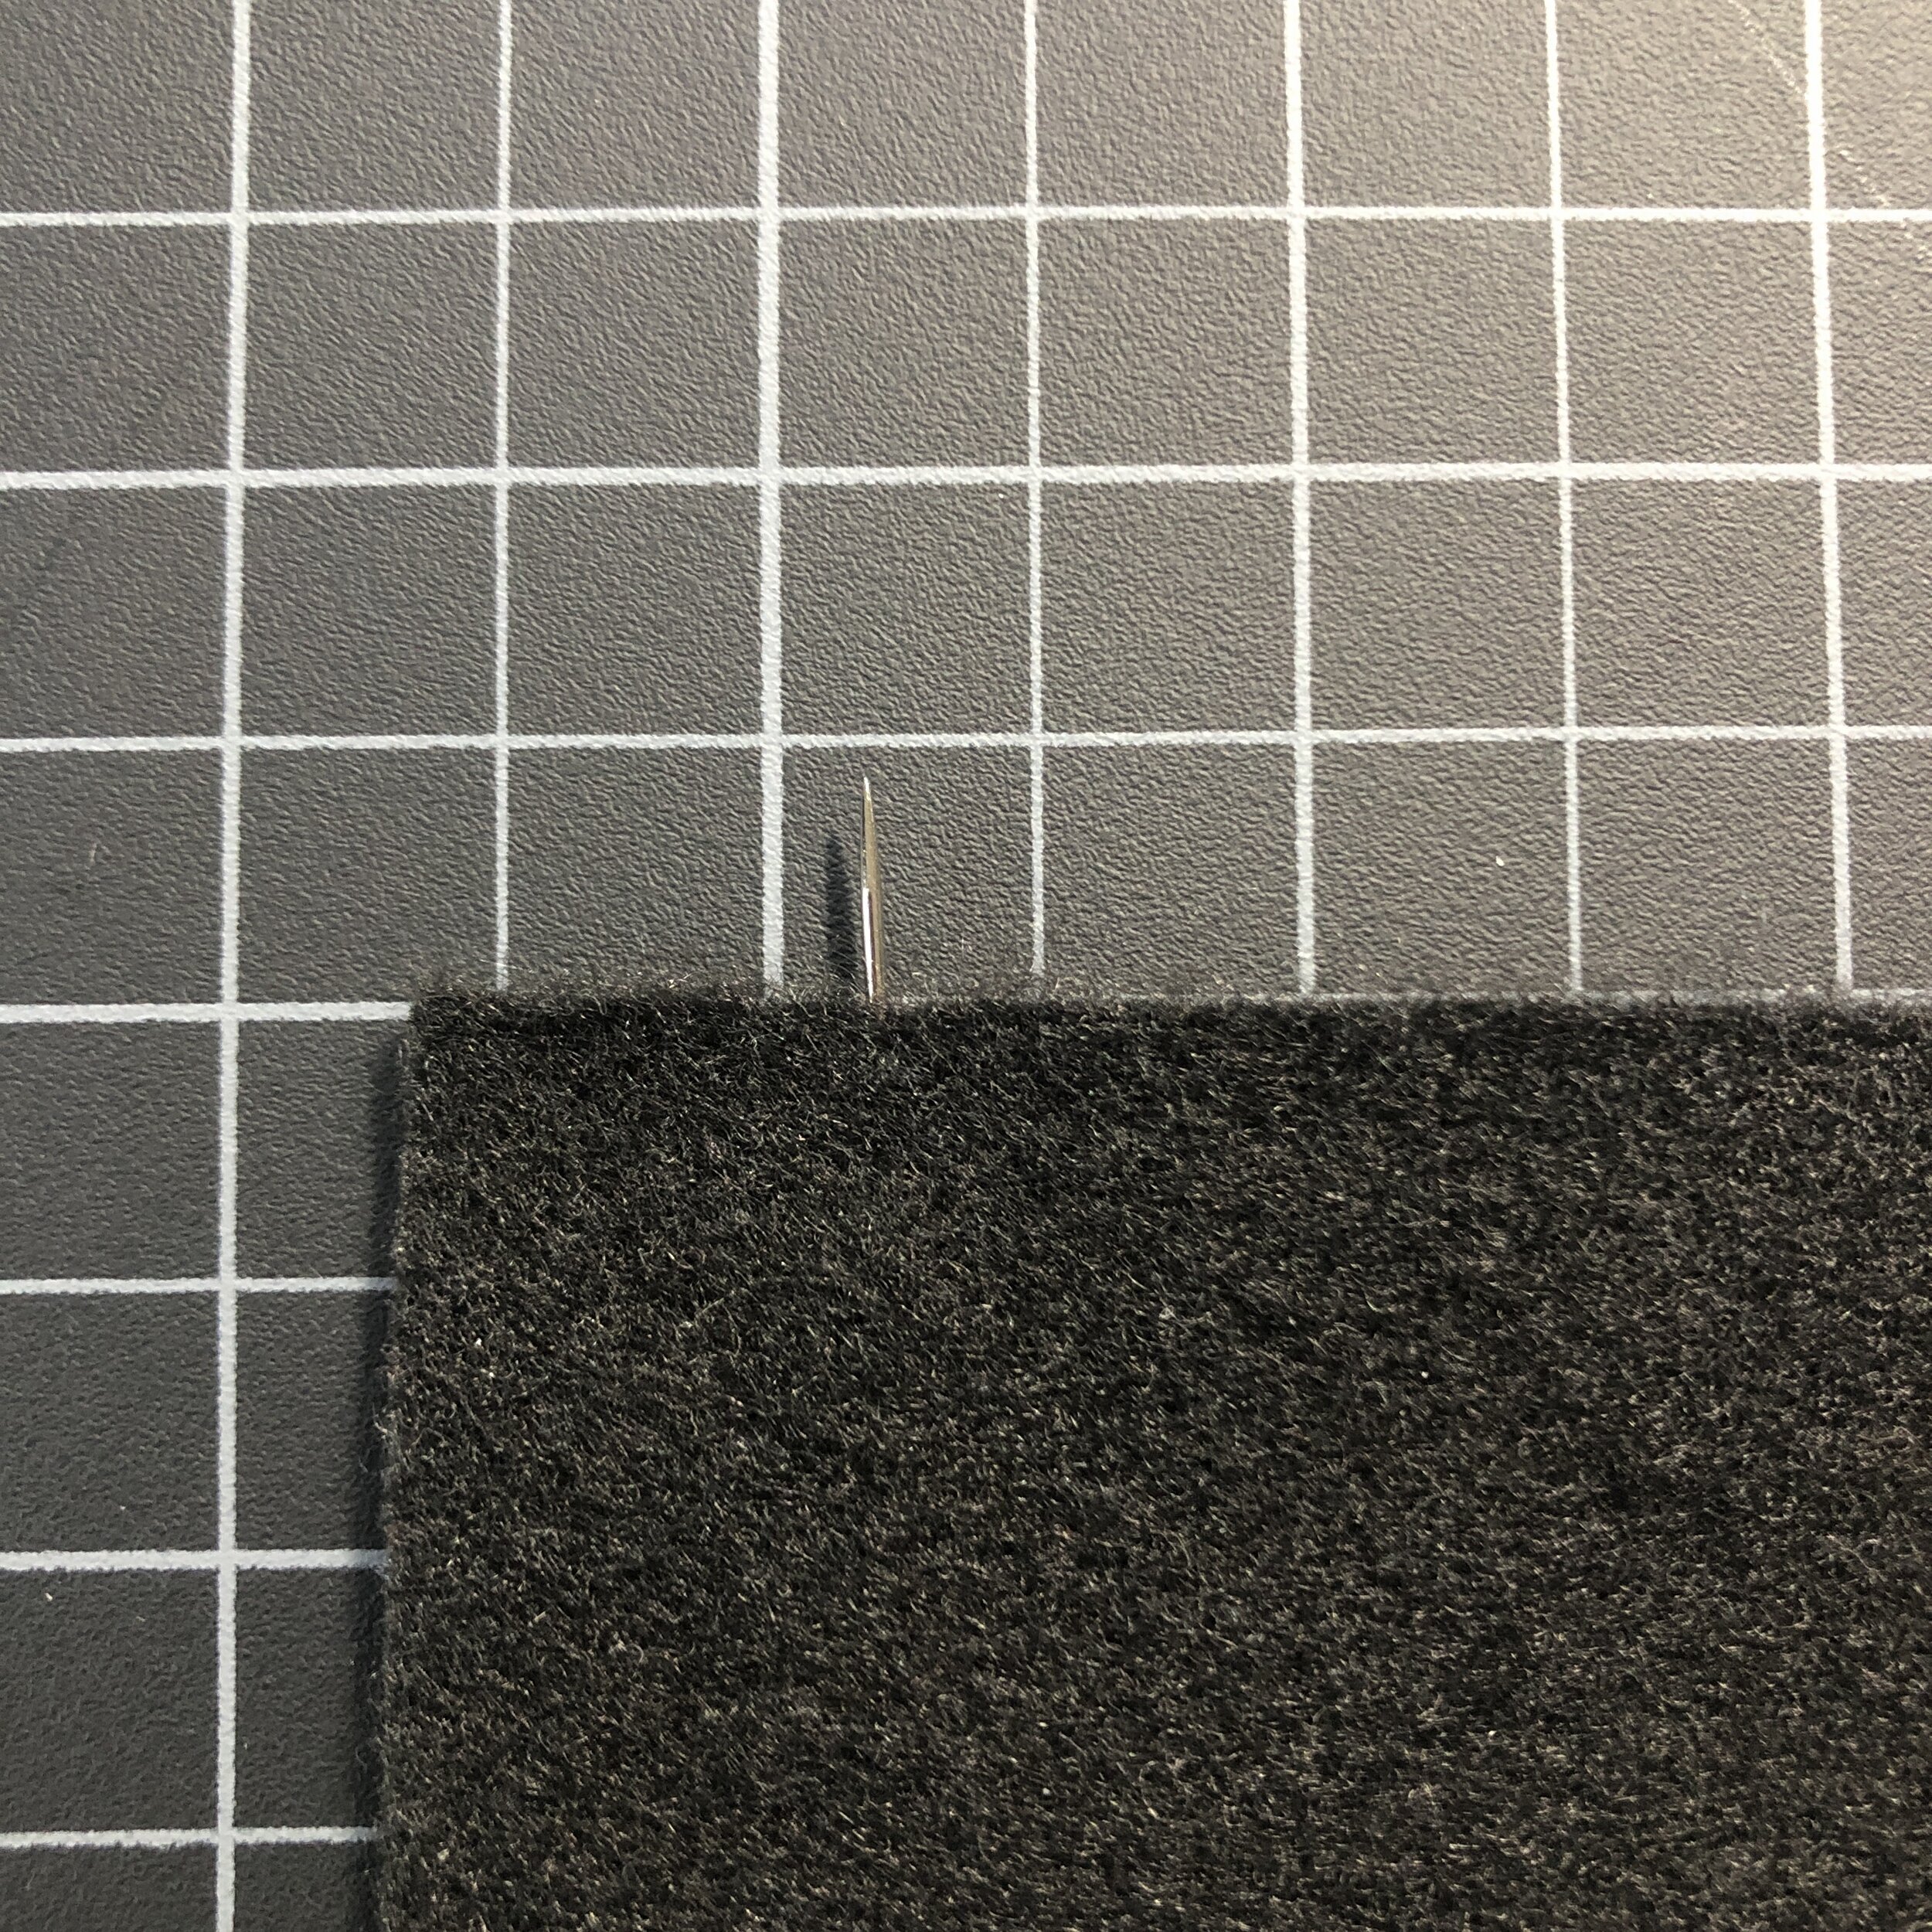  Here is the needle poking out from the edge of the felt (from the other side). 